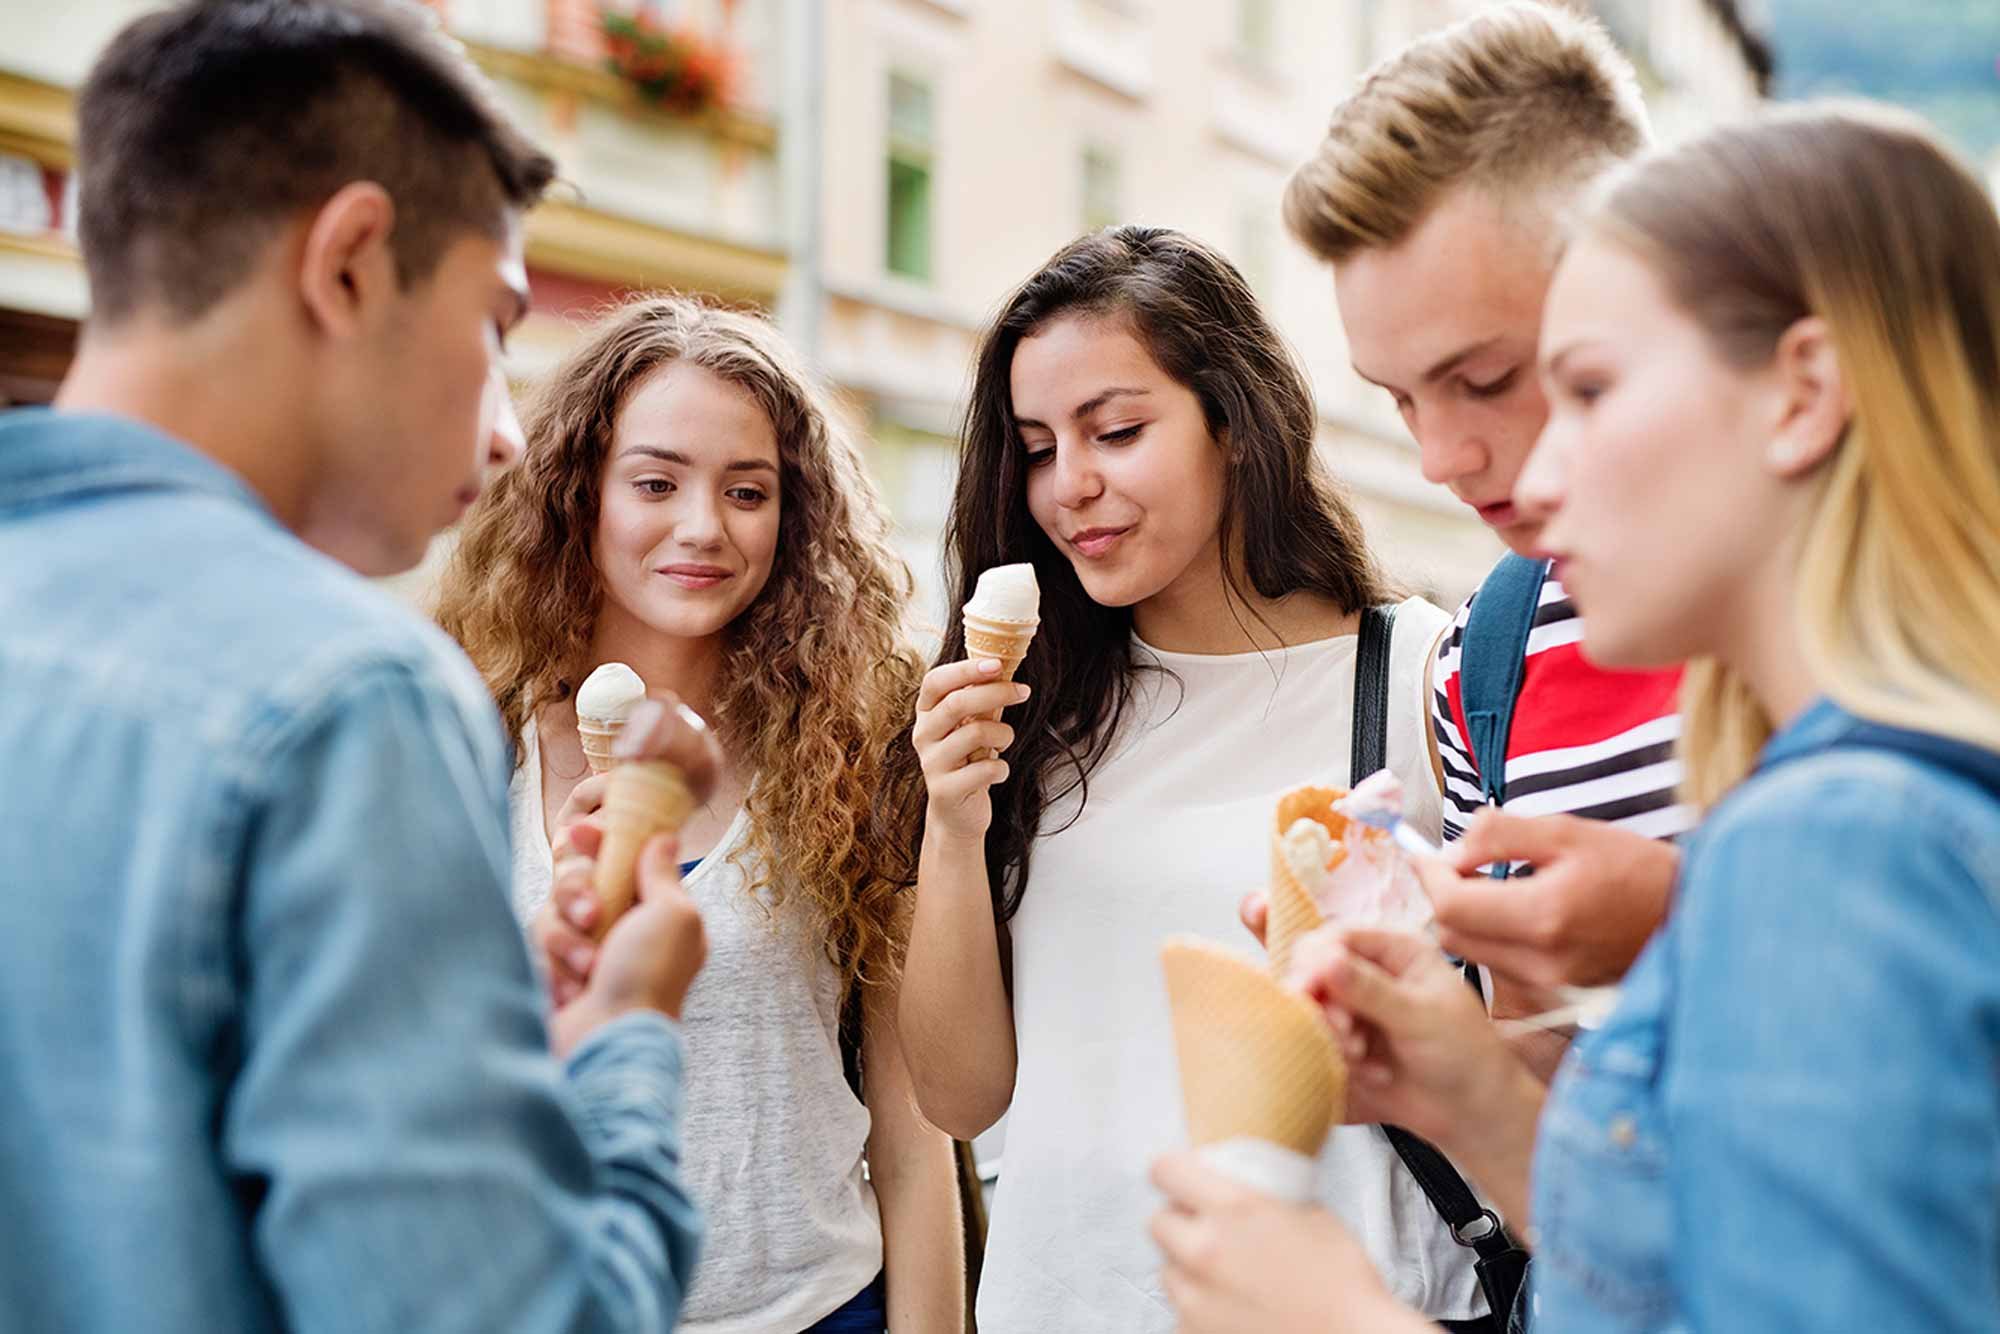 Group of teens eating ice cream purchased using youth checking account.